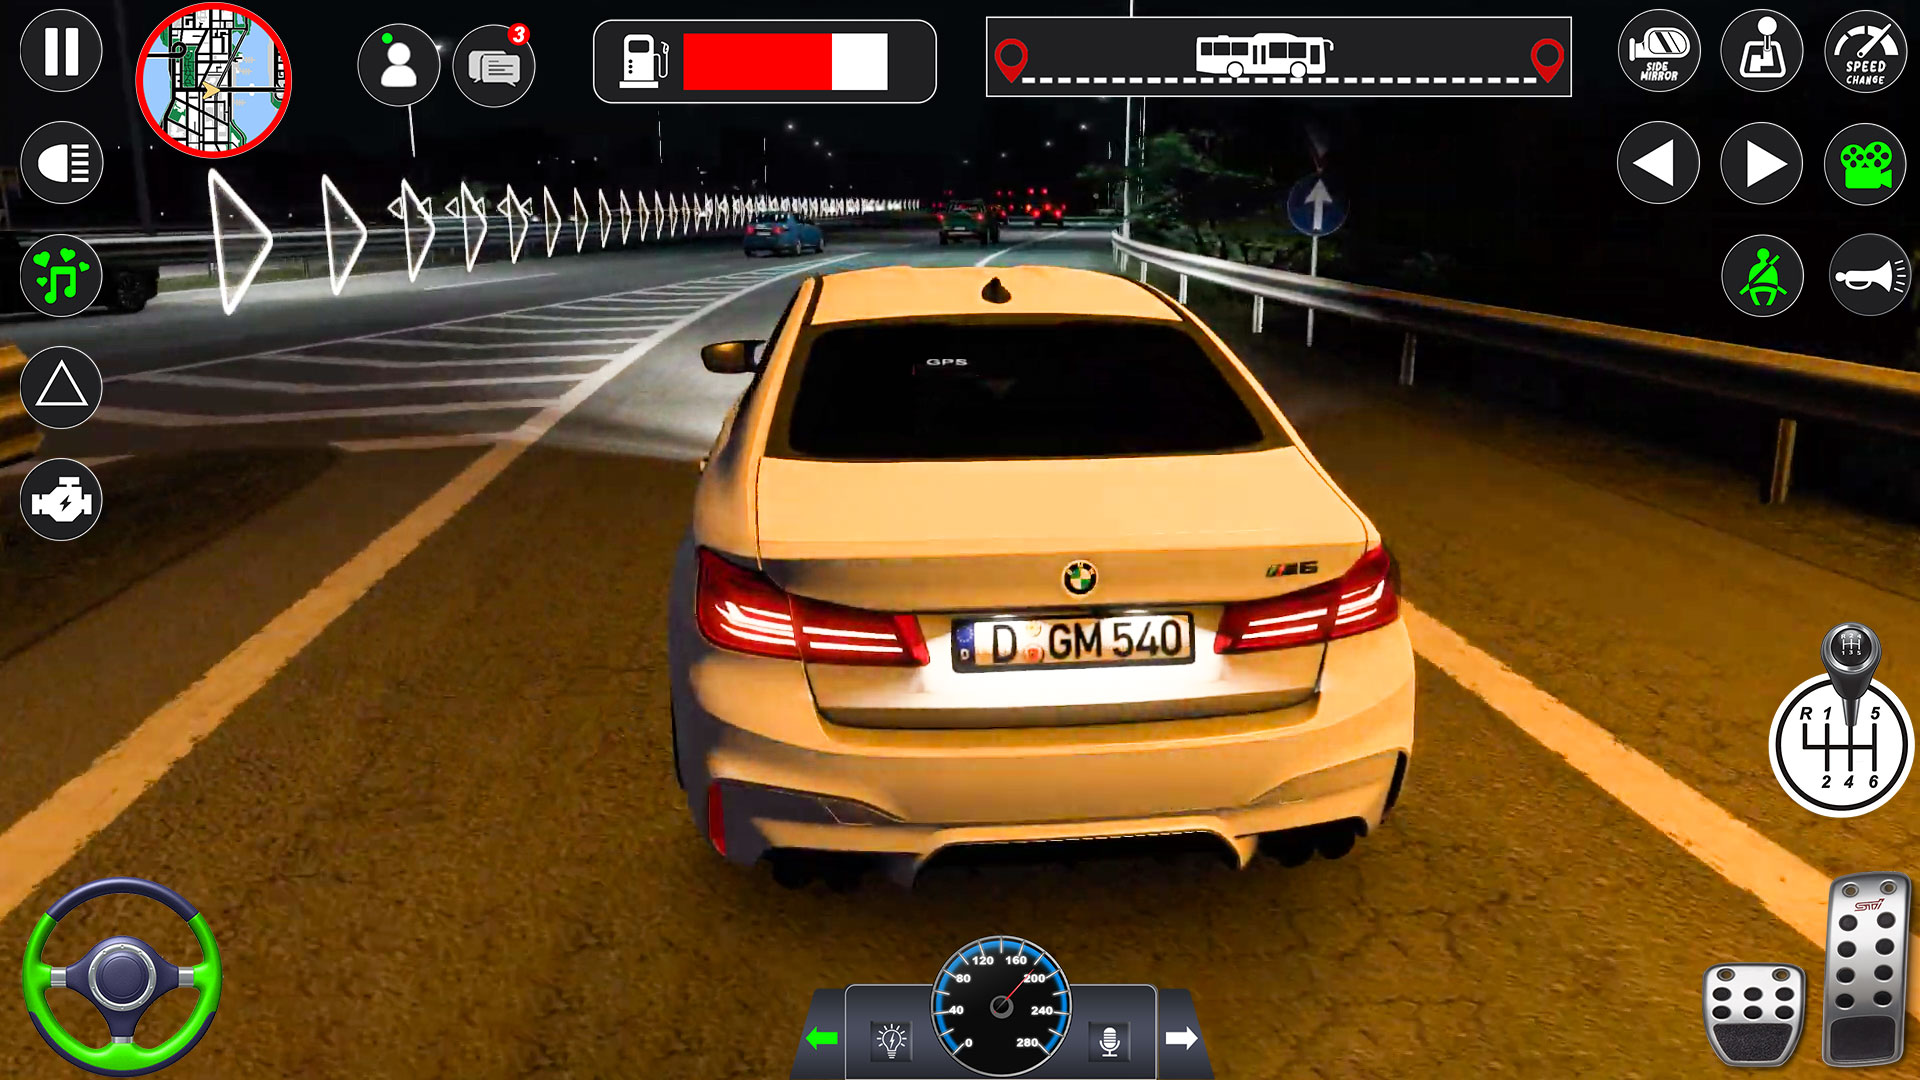 Download Car Driving Academy Simulator on PC with MEmu